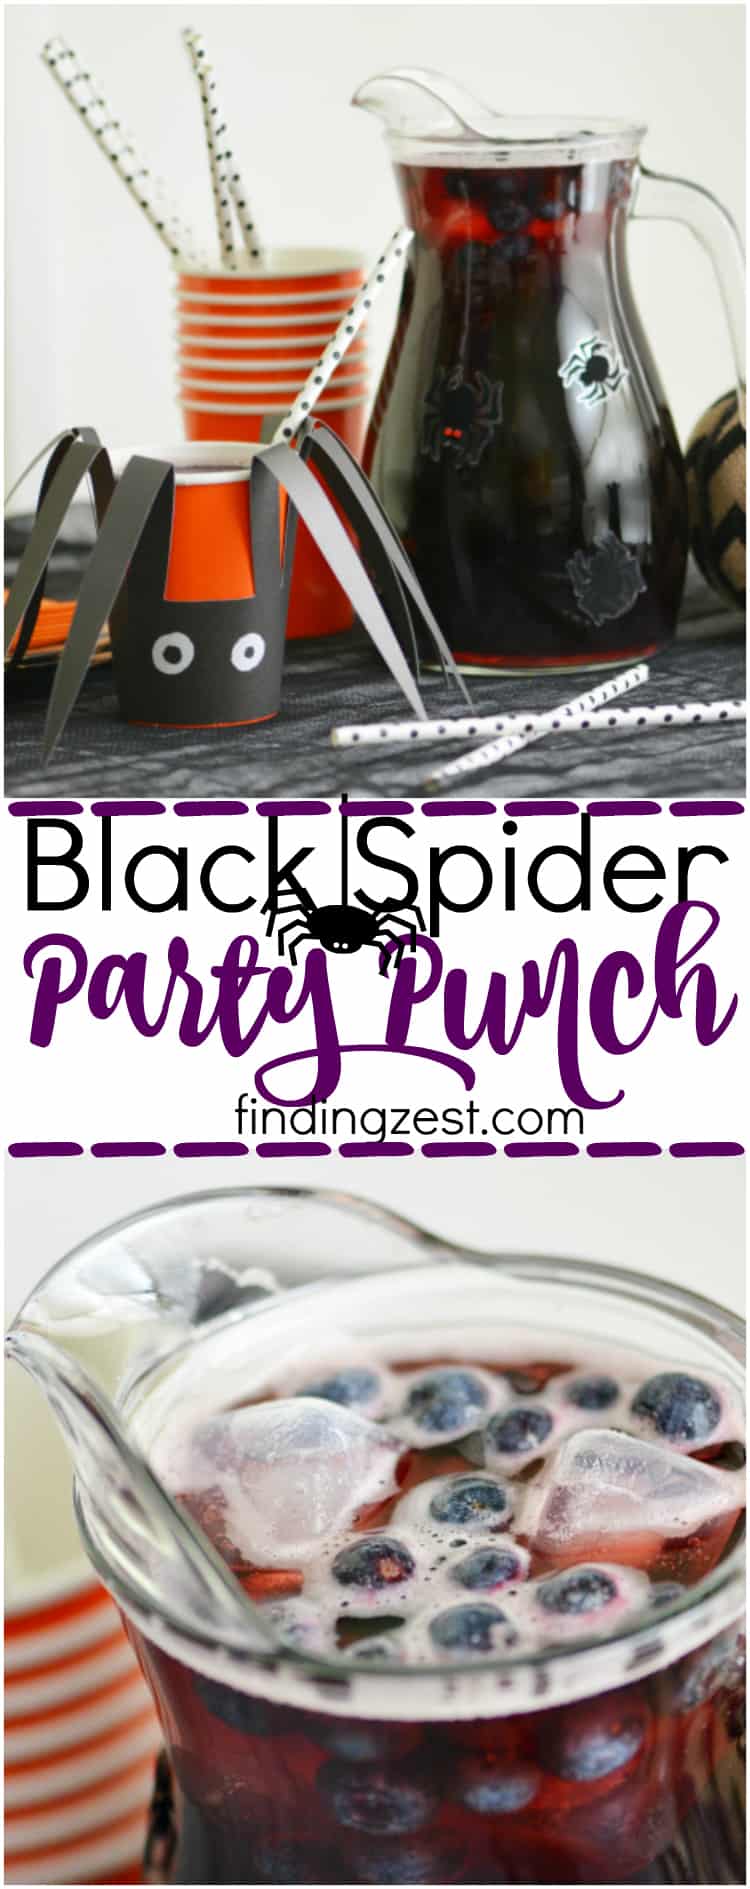 Black spider party punch